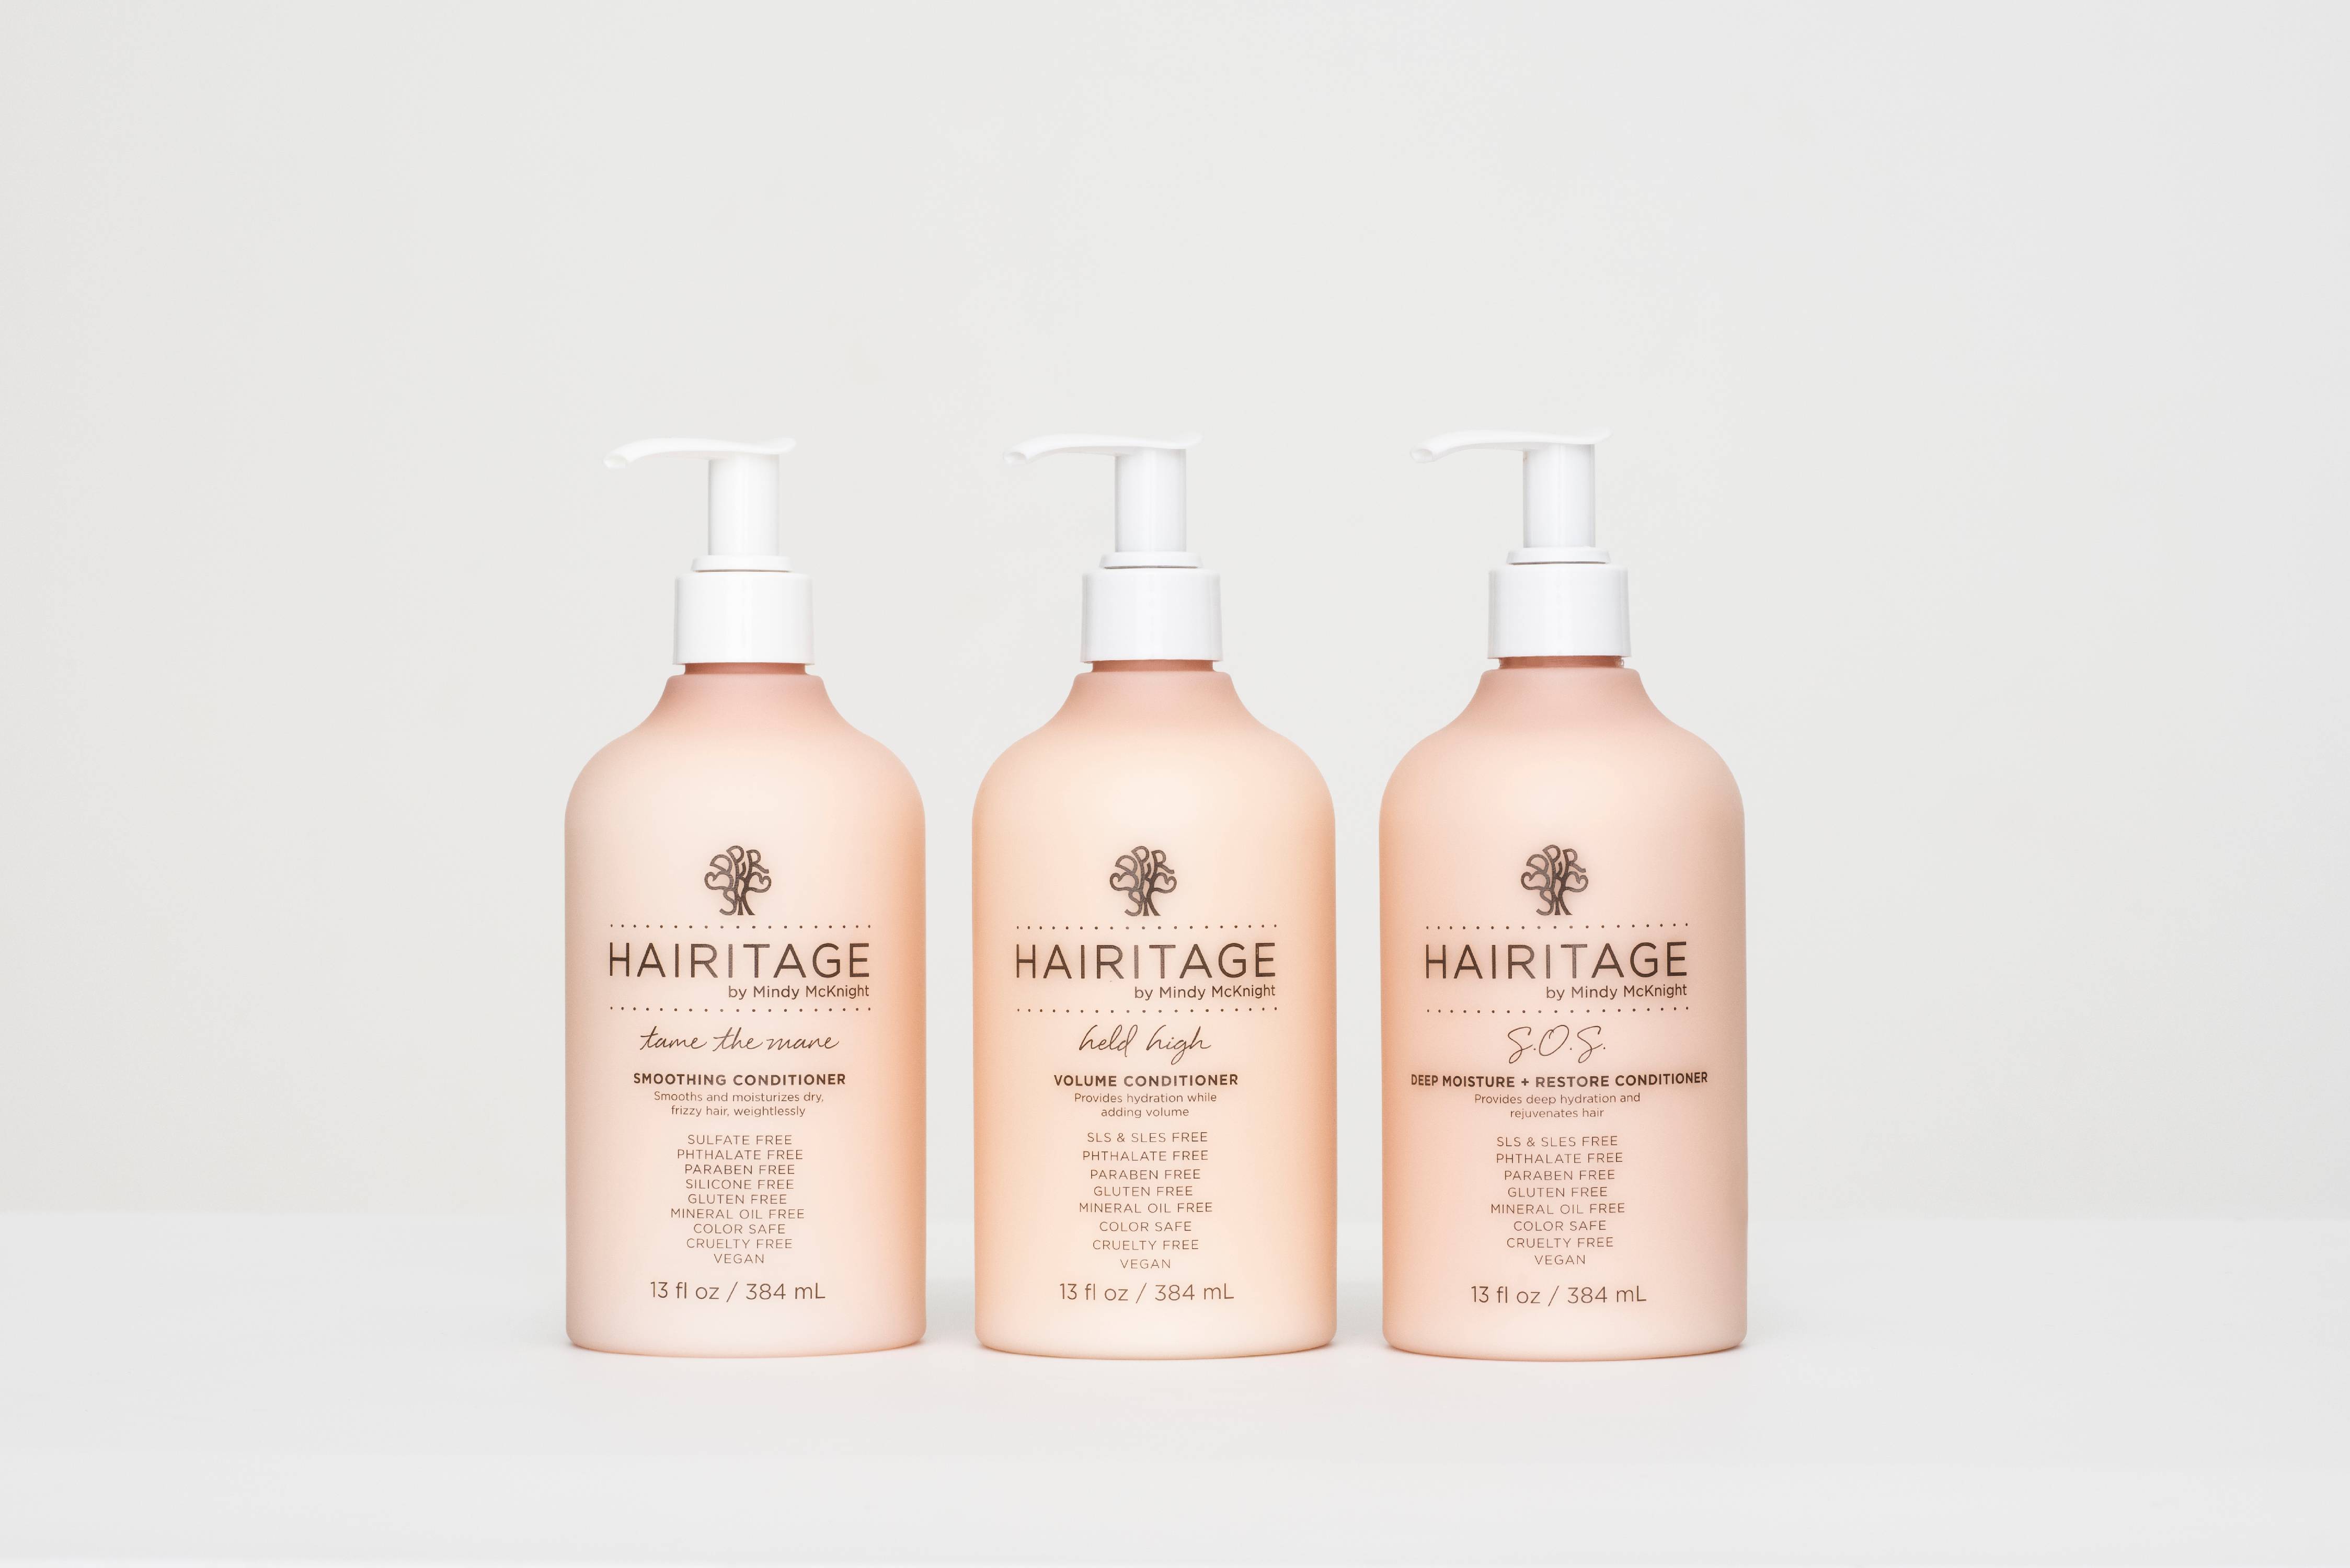 Hairitage Held High Hydrating Volume Conditioner with Jojoba Oil for Dry, Fine Hair | 13 oz. - image 2 of 8